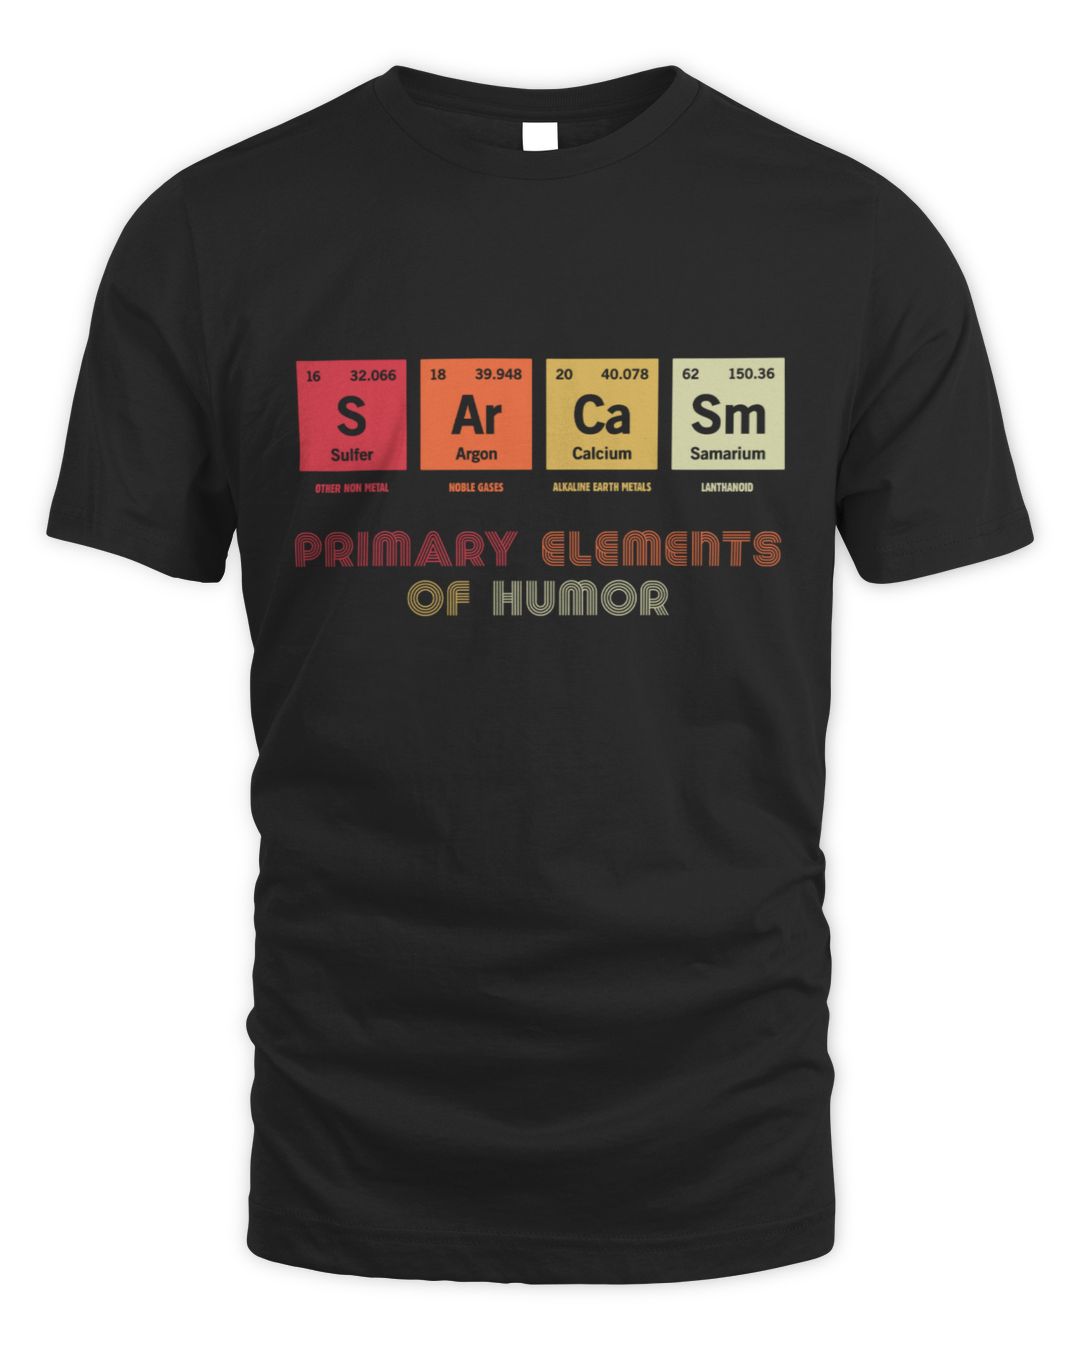 Primary Elements of Humor Science Shirt Sarcasm S Ar Ca Sm | Science Store